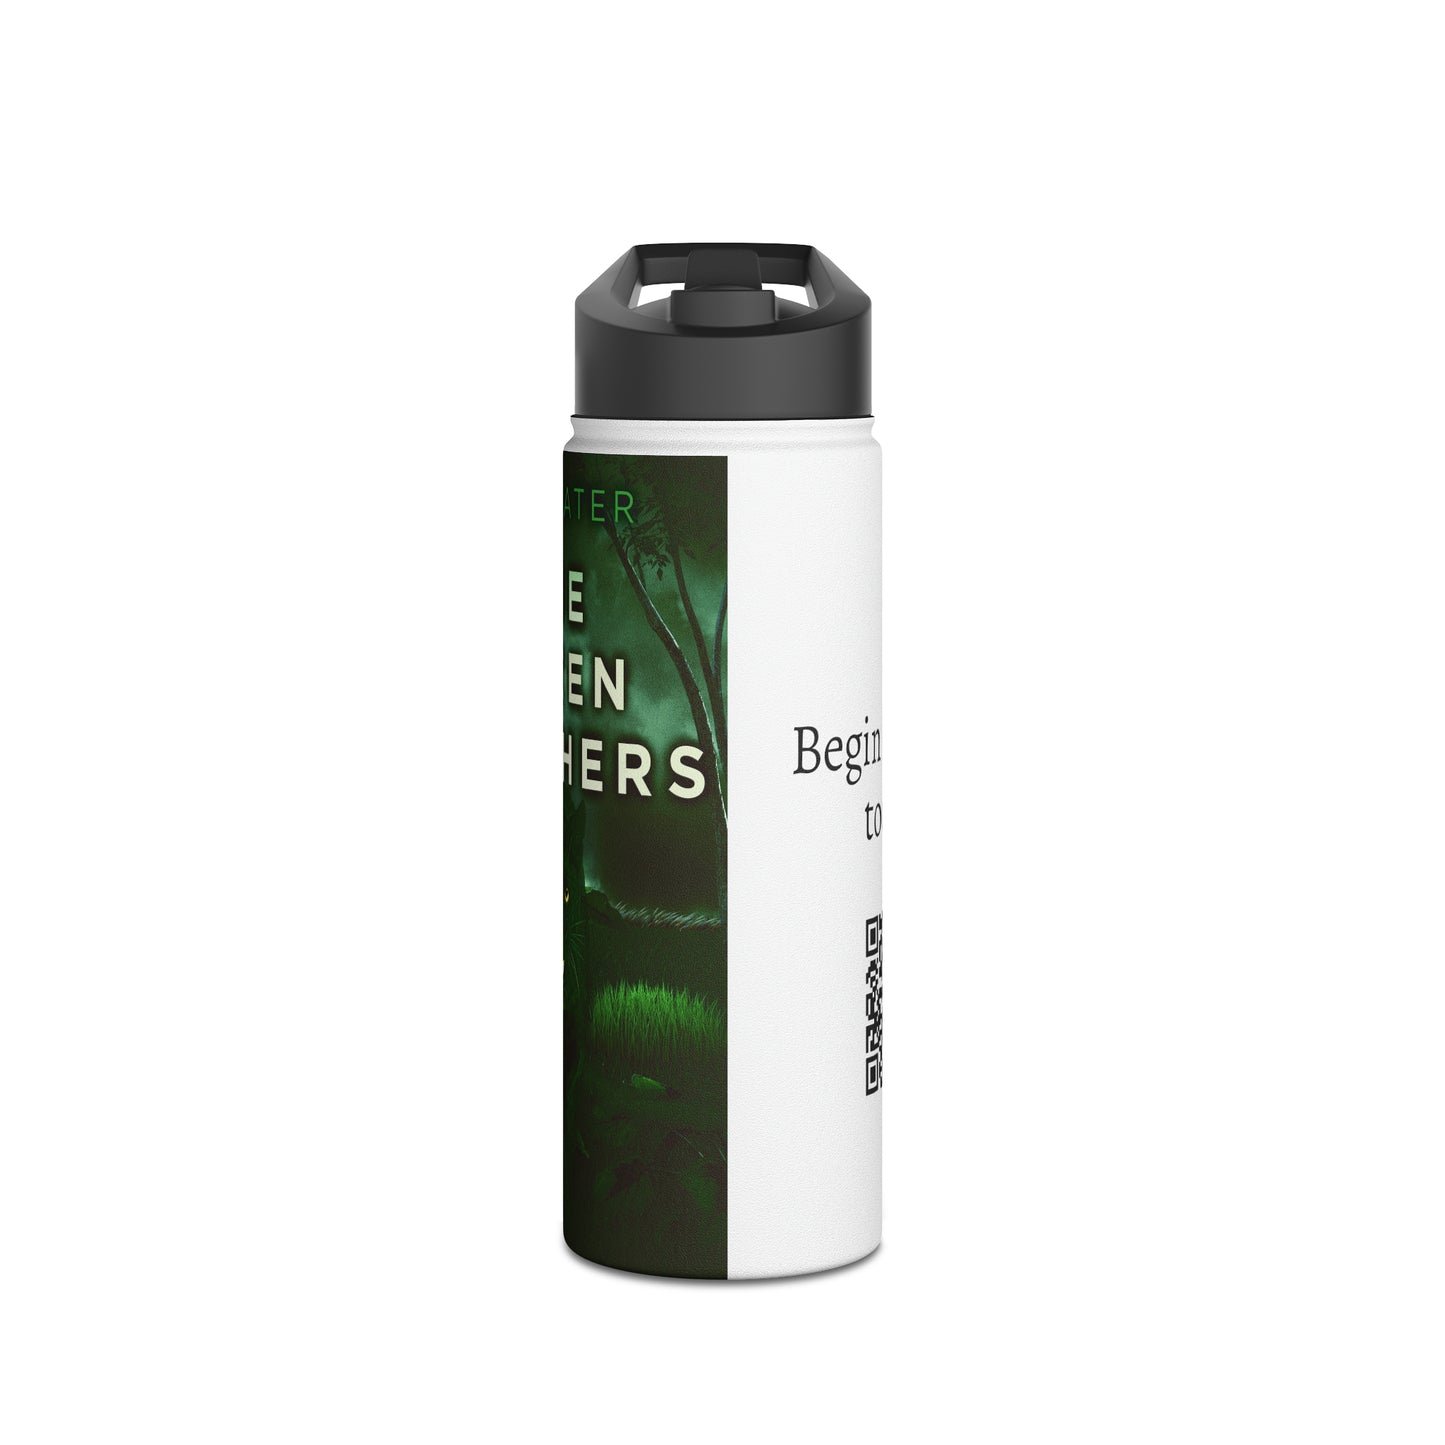 The Green Panthers - Stainless Steel Water Bottle